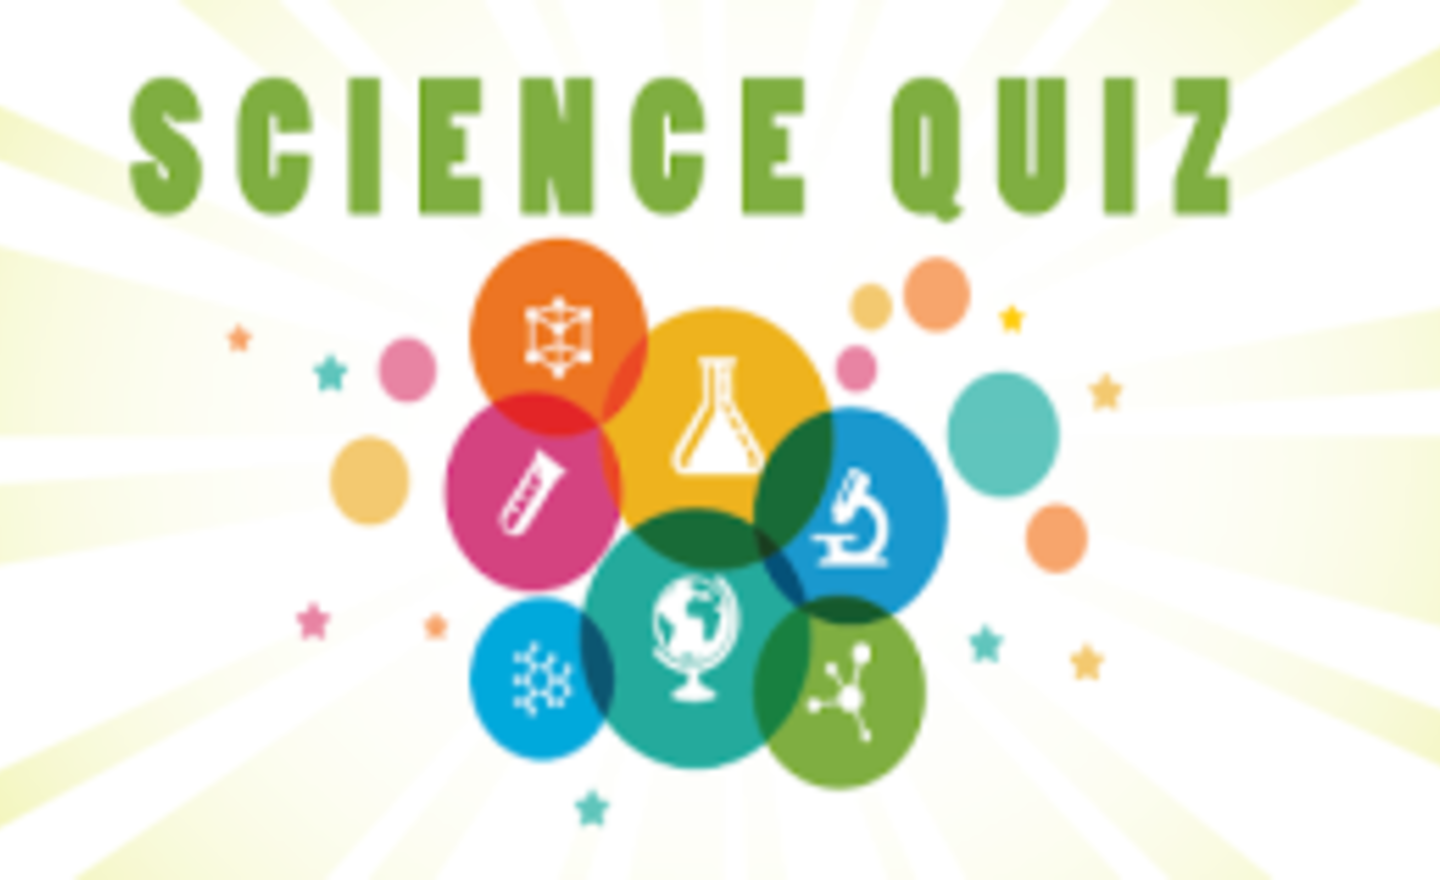 Image of Science Quizzes